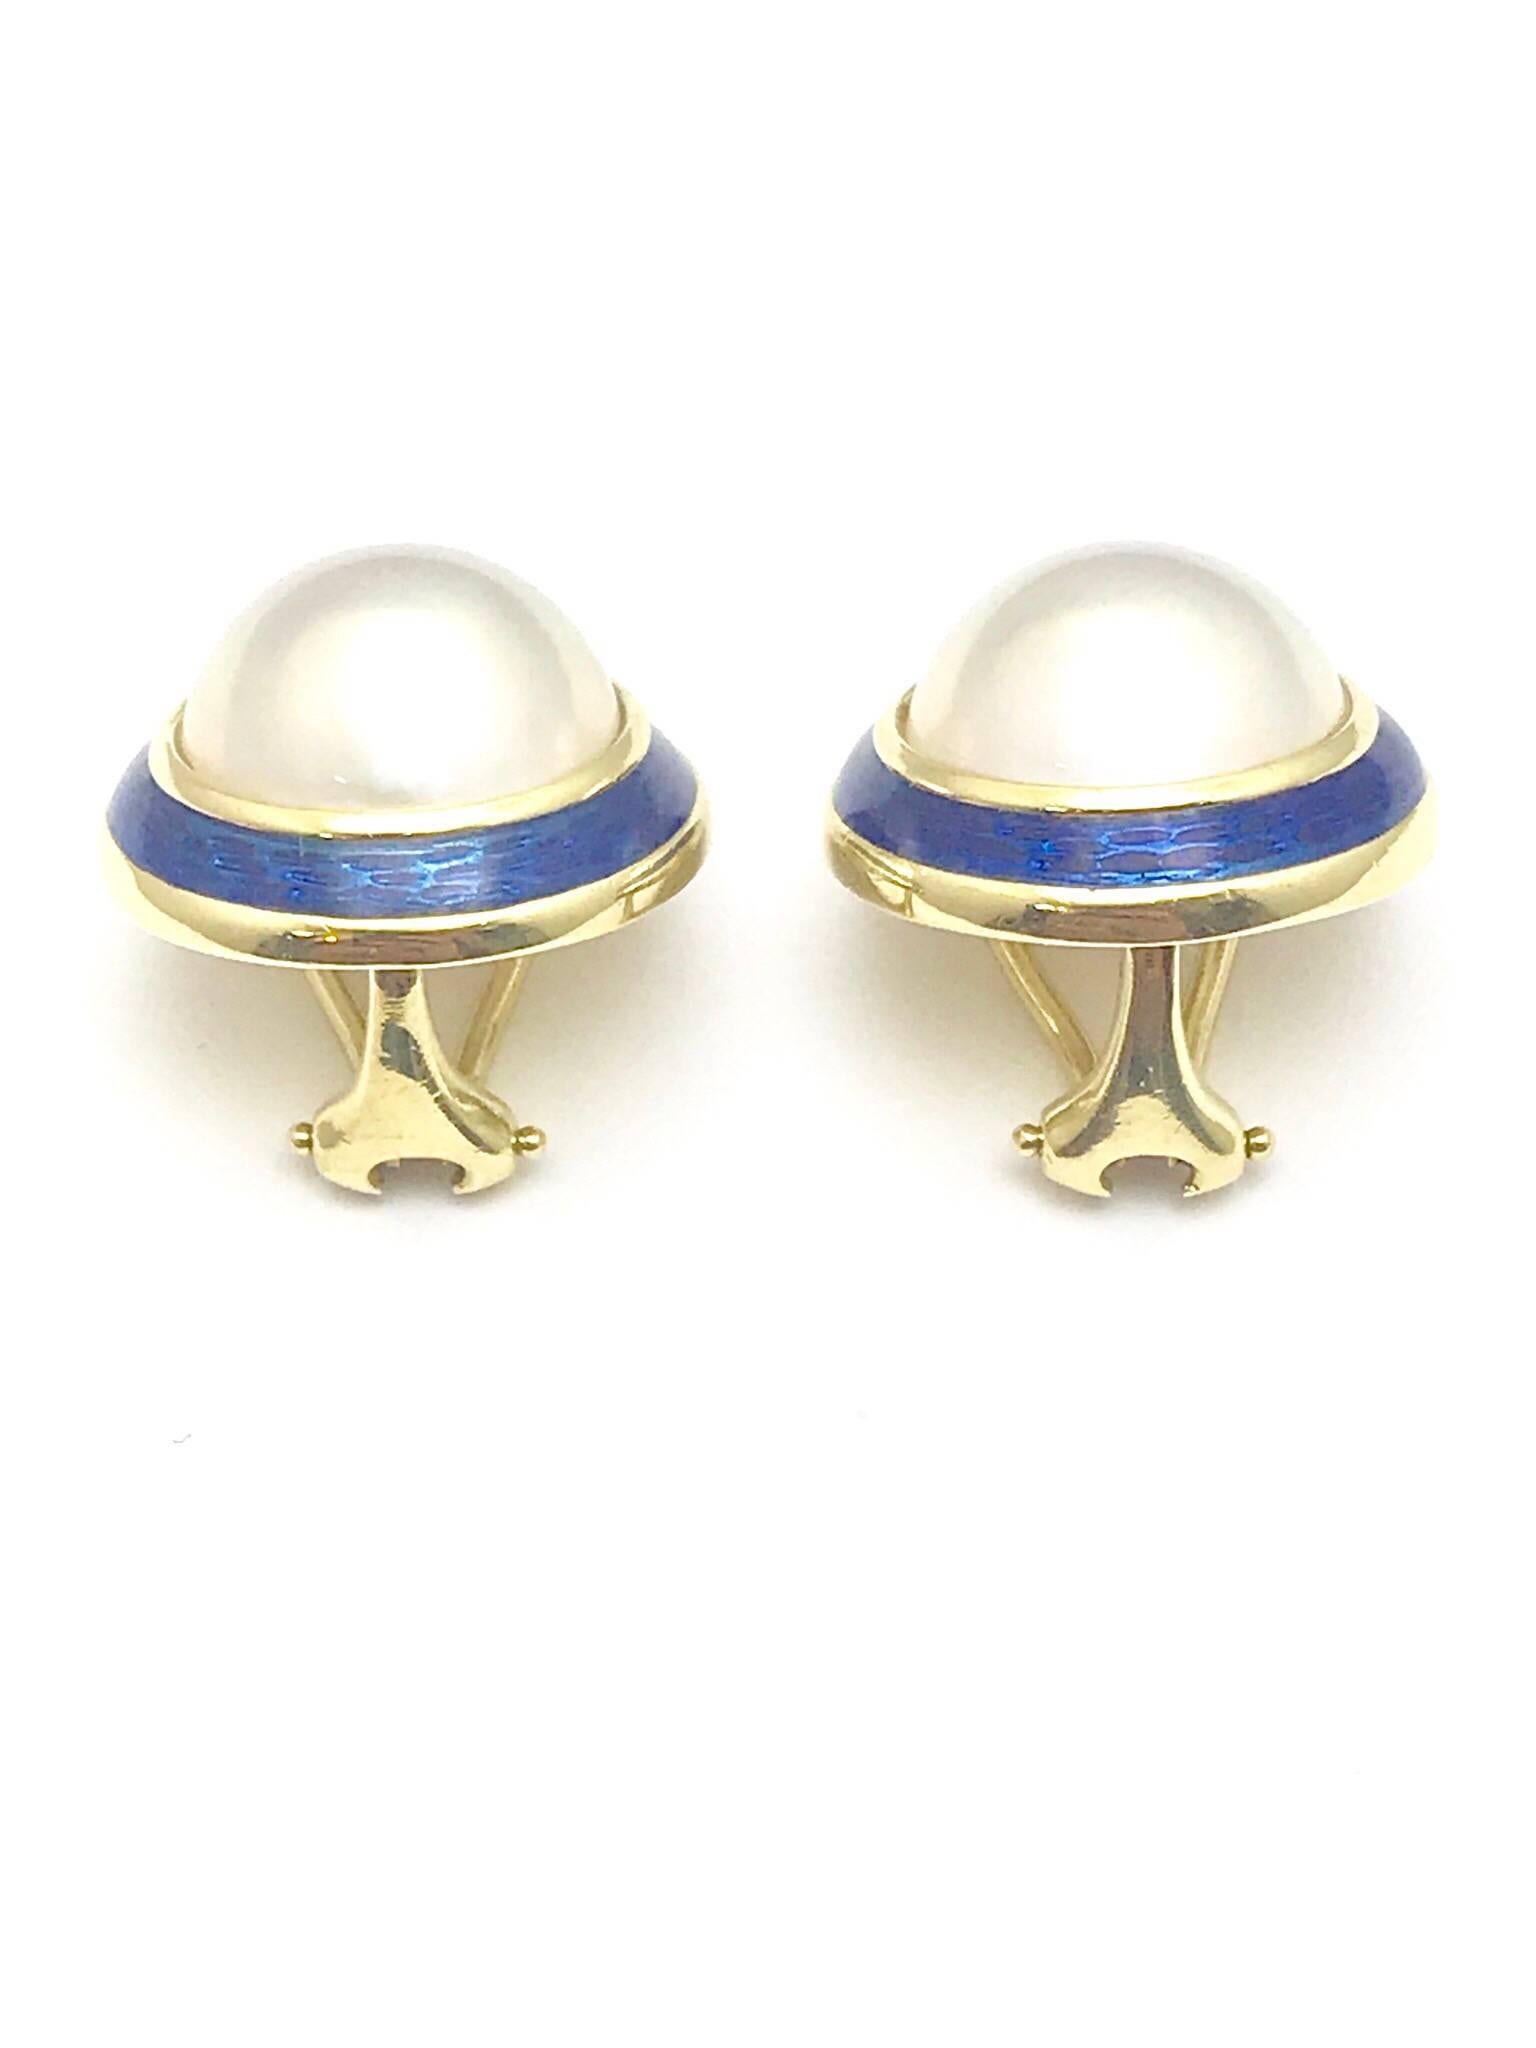 A pair of Tiffany & Co. mabe pearl and blue enamel 18 karat yellow gold clip on earrings.  The pearls measure 14.00mm, framed by a line of blue enamel, with a clip on back.  

Signature:  Tiffany & Co. 
Hallmark:  750